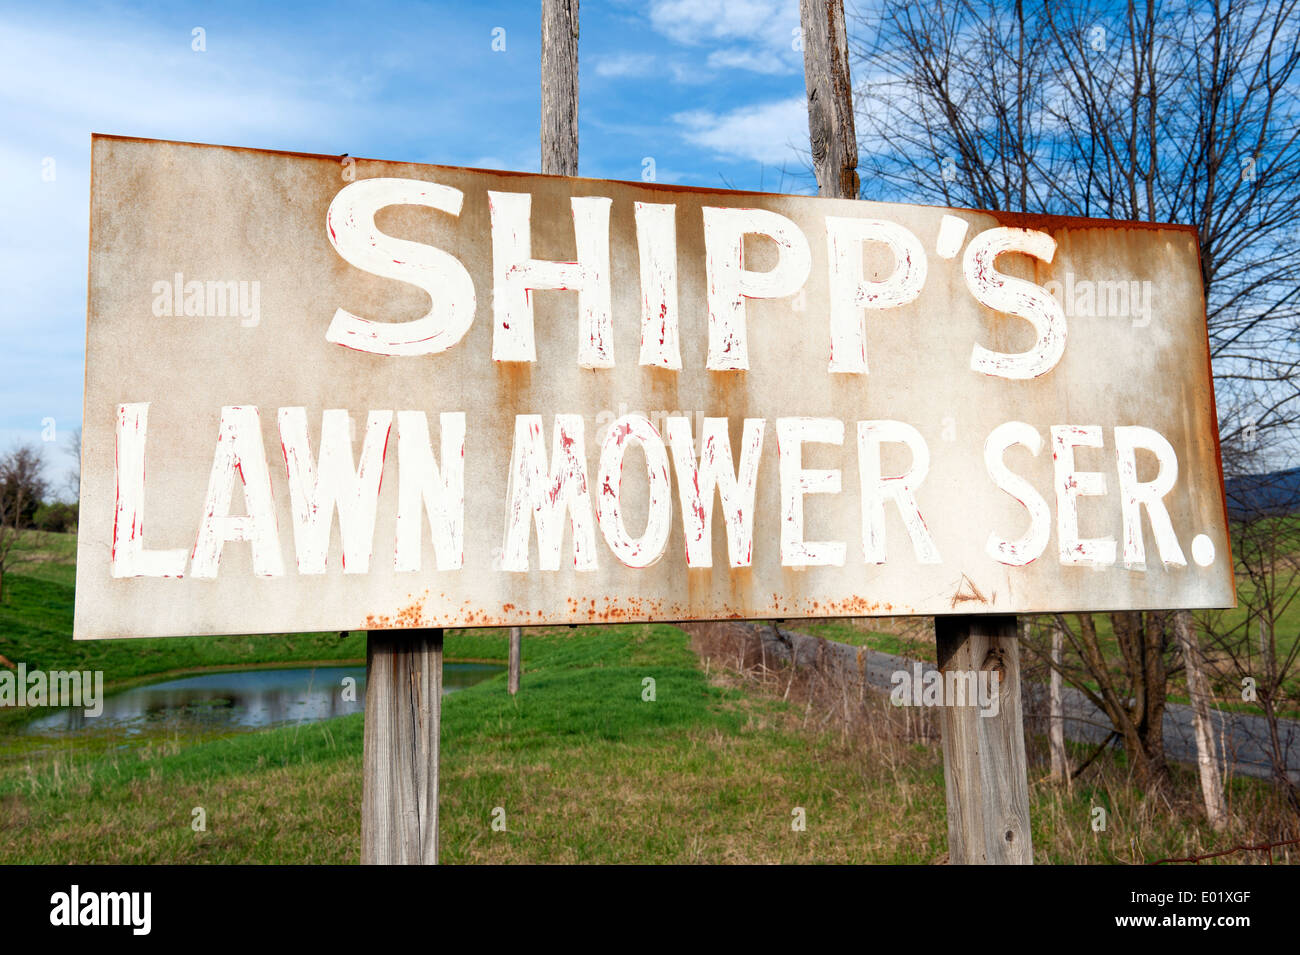 Old weathered sign for a lawn mower servicing business. Stock Photo